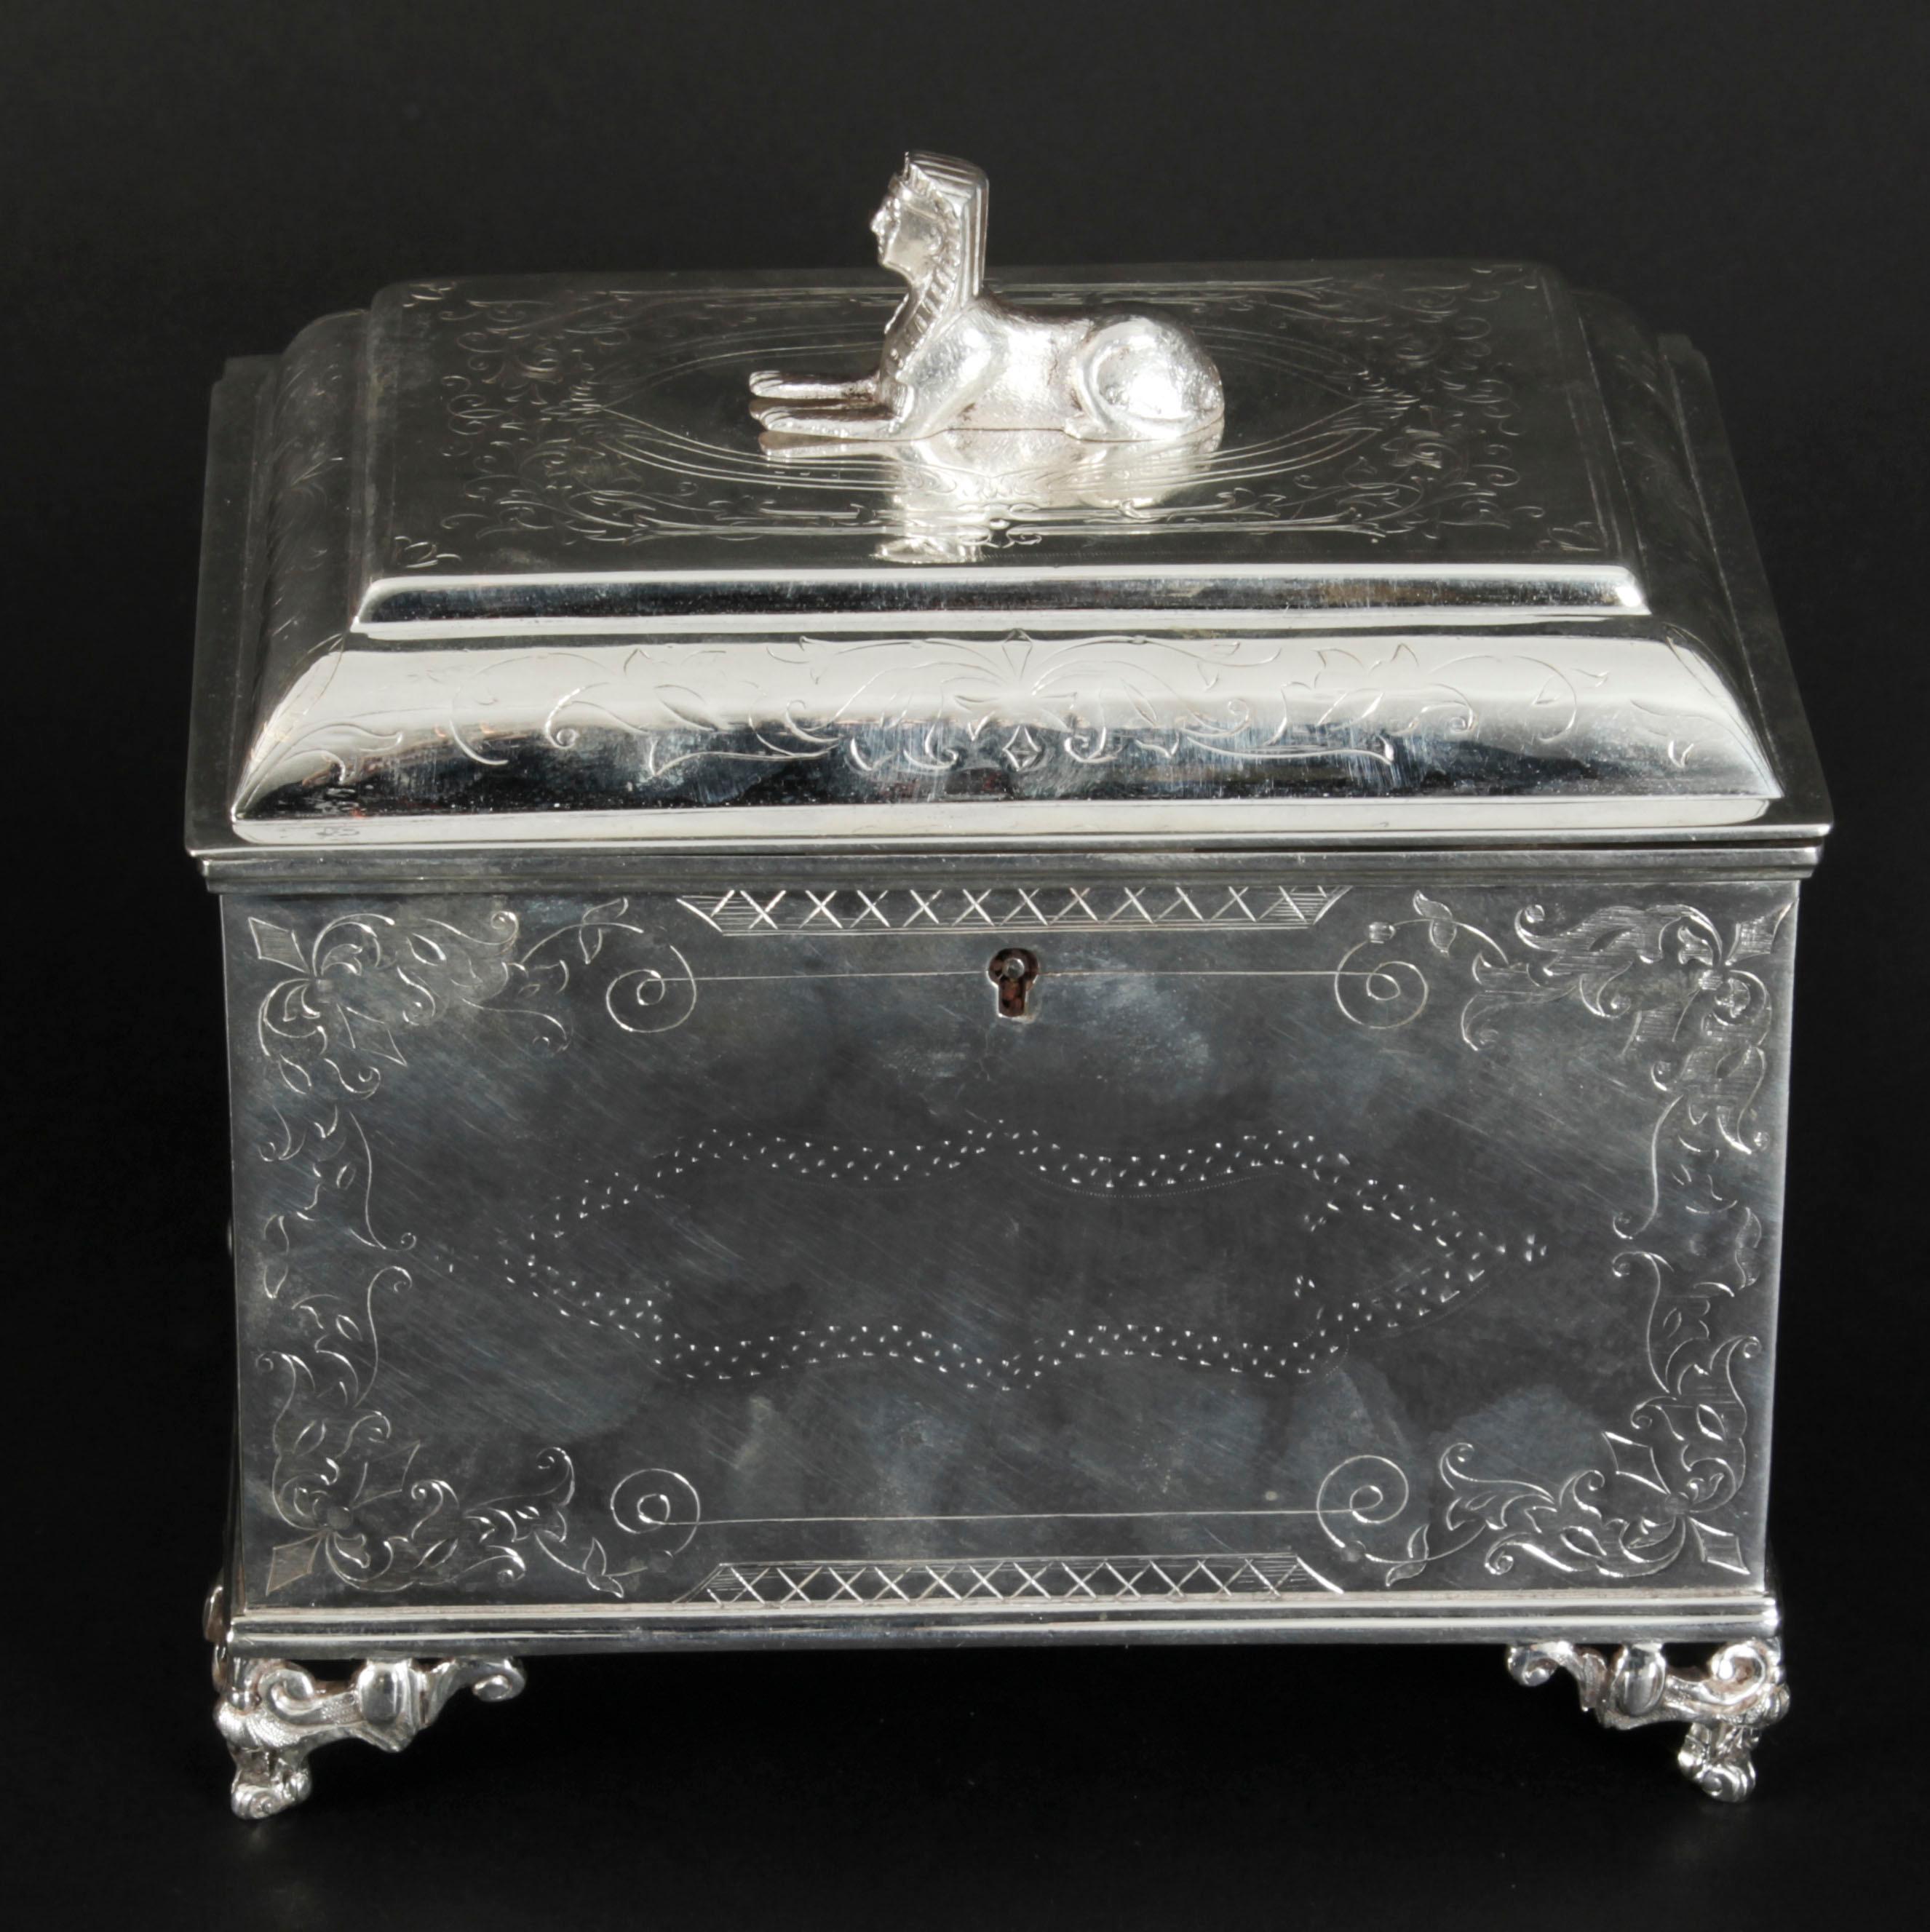 Antique Silver Plated Empire Revival Tea Caddy 19th Century For Sale 1